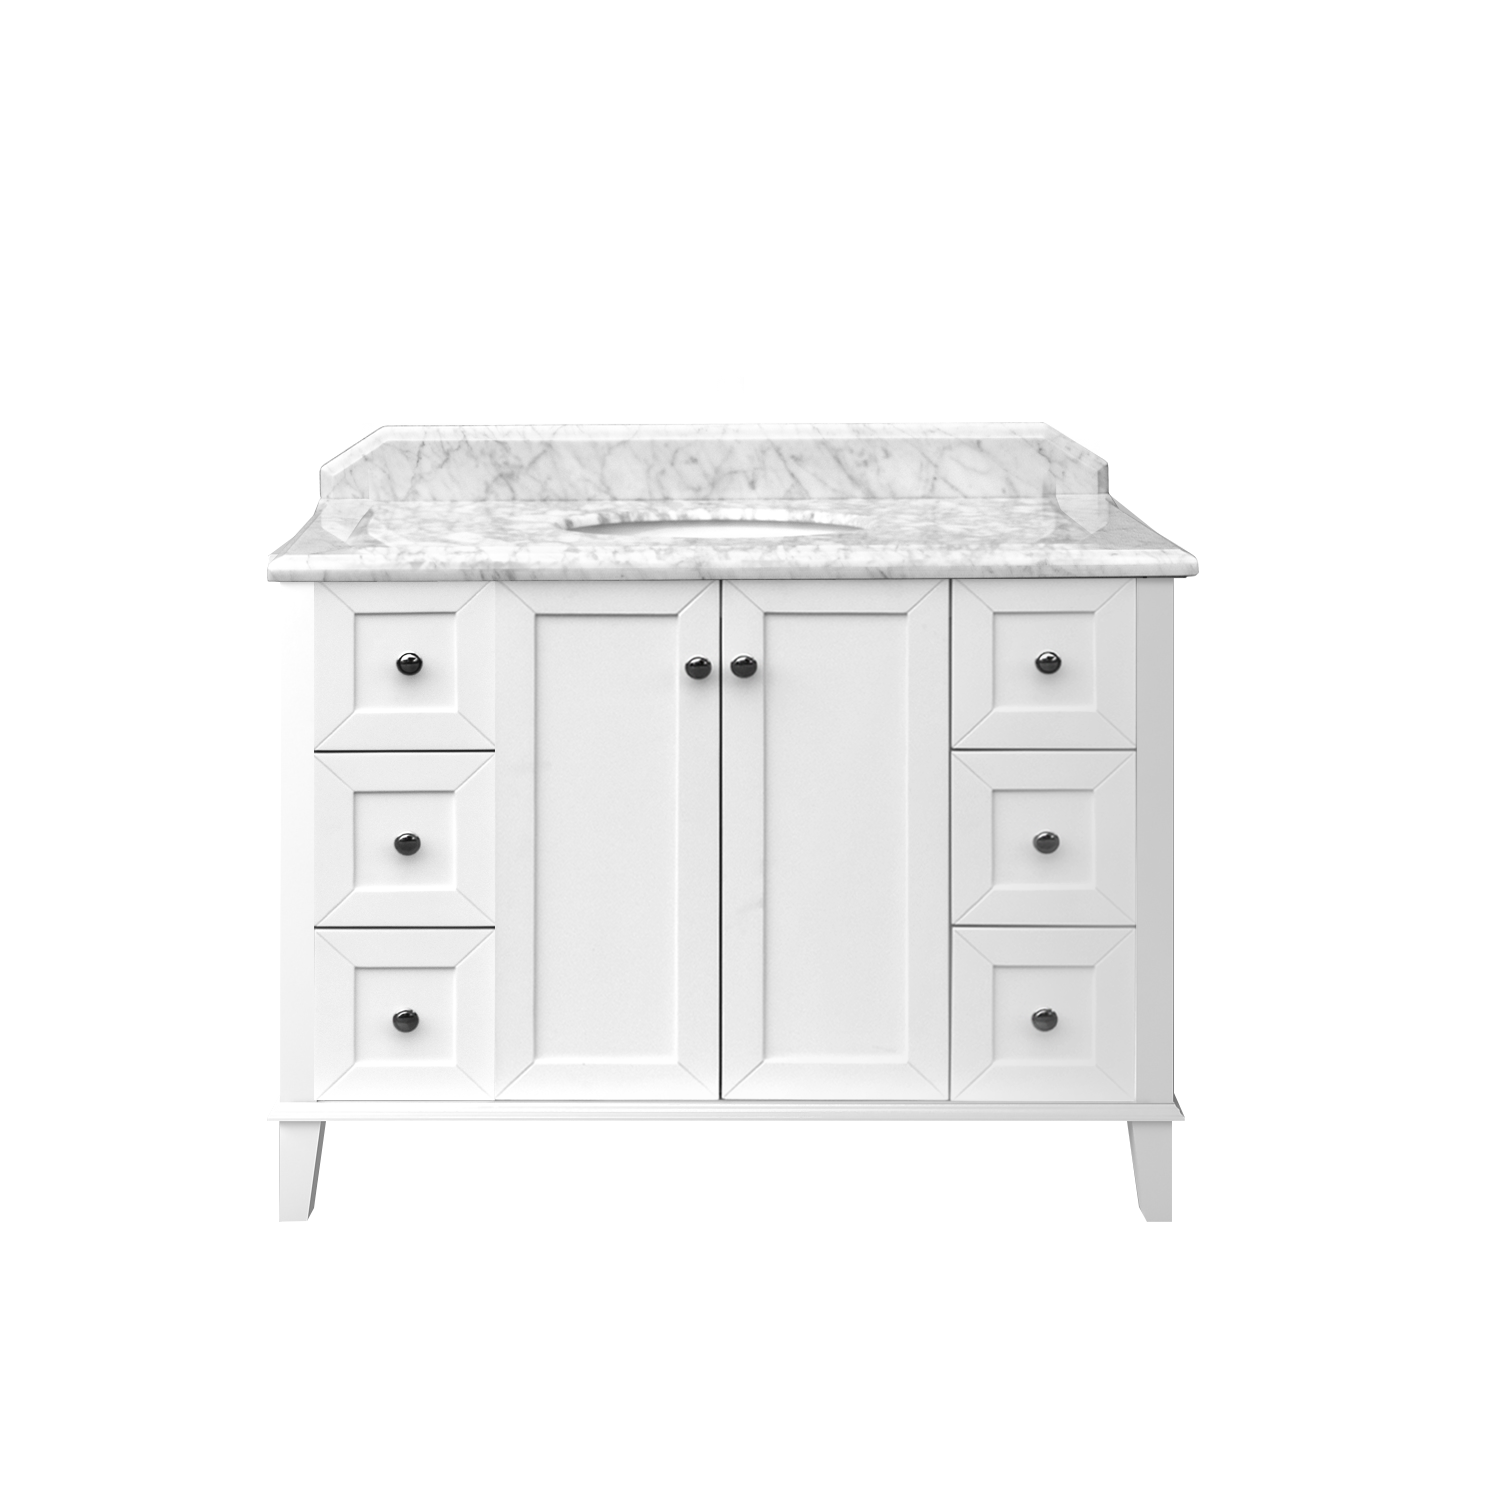 Coventry 120x55 Single Bowl White Vanity with Marble Top & Under Counter Basin - 3TH